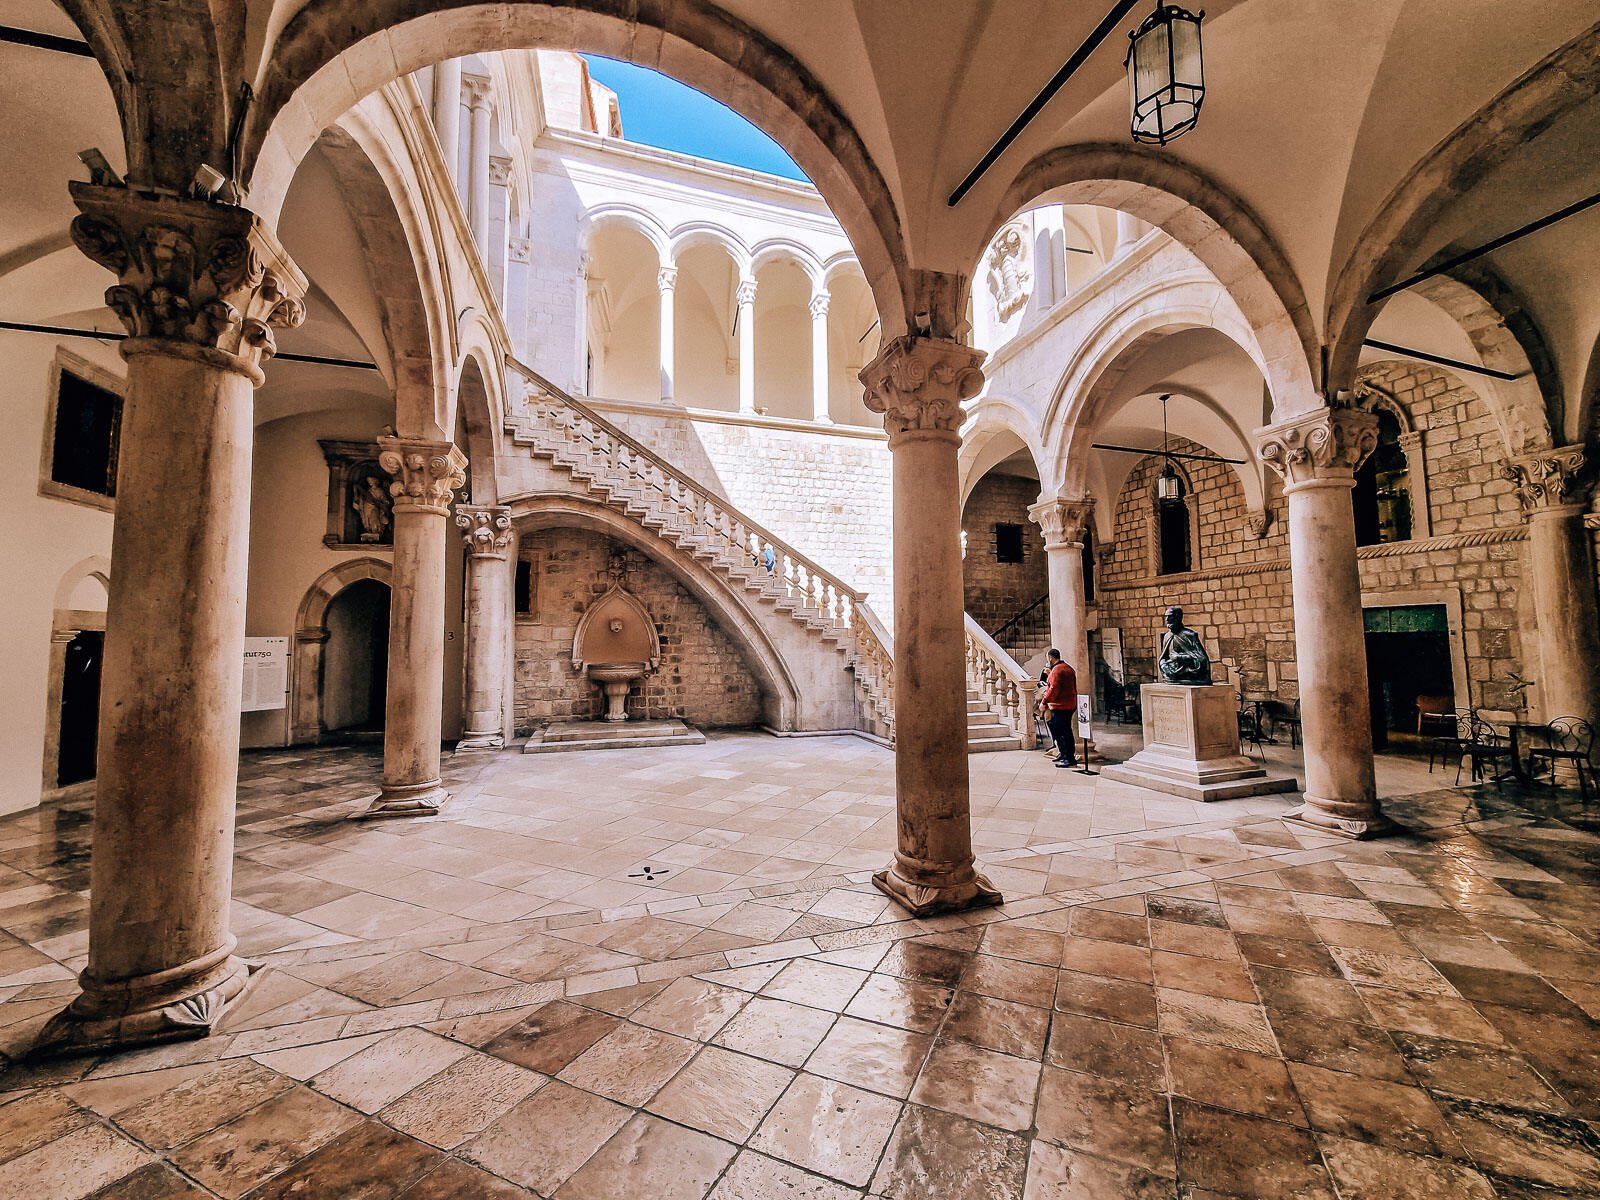 interior courtyard of a grand stone palace in dubrovnik